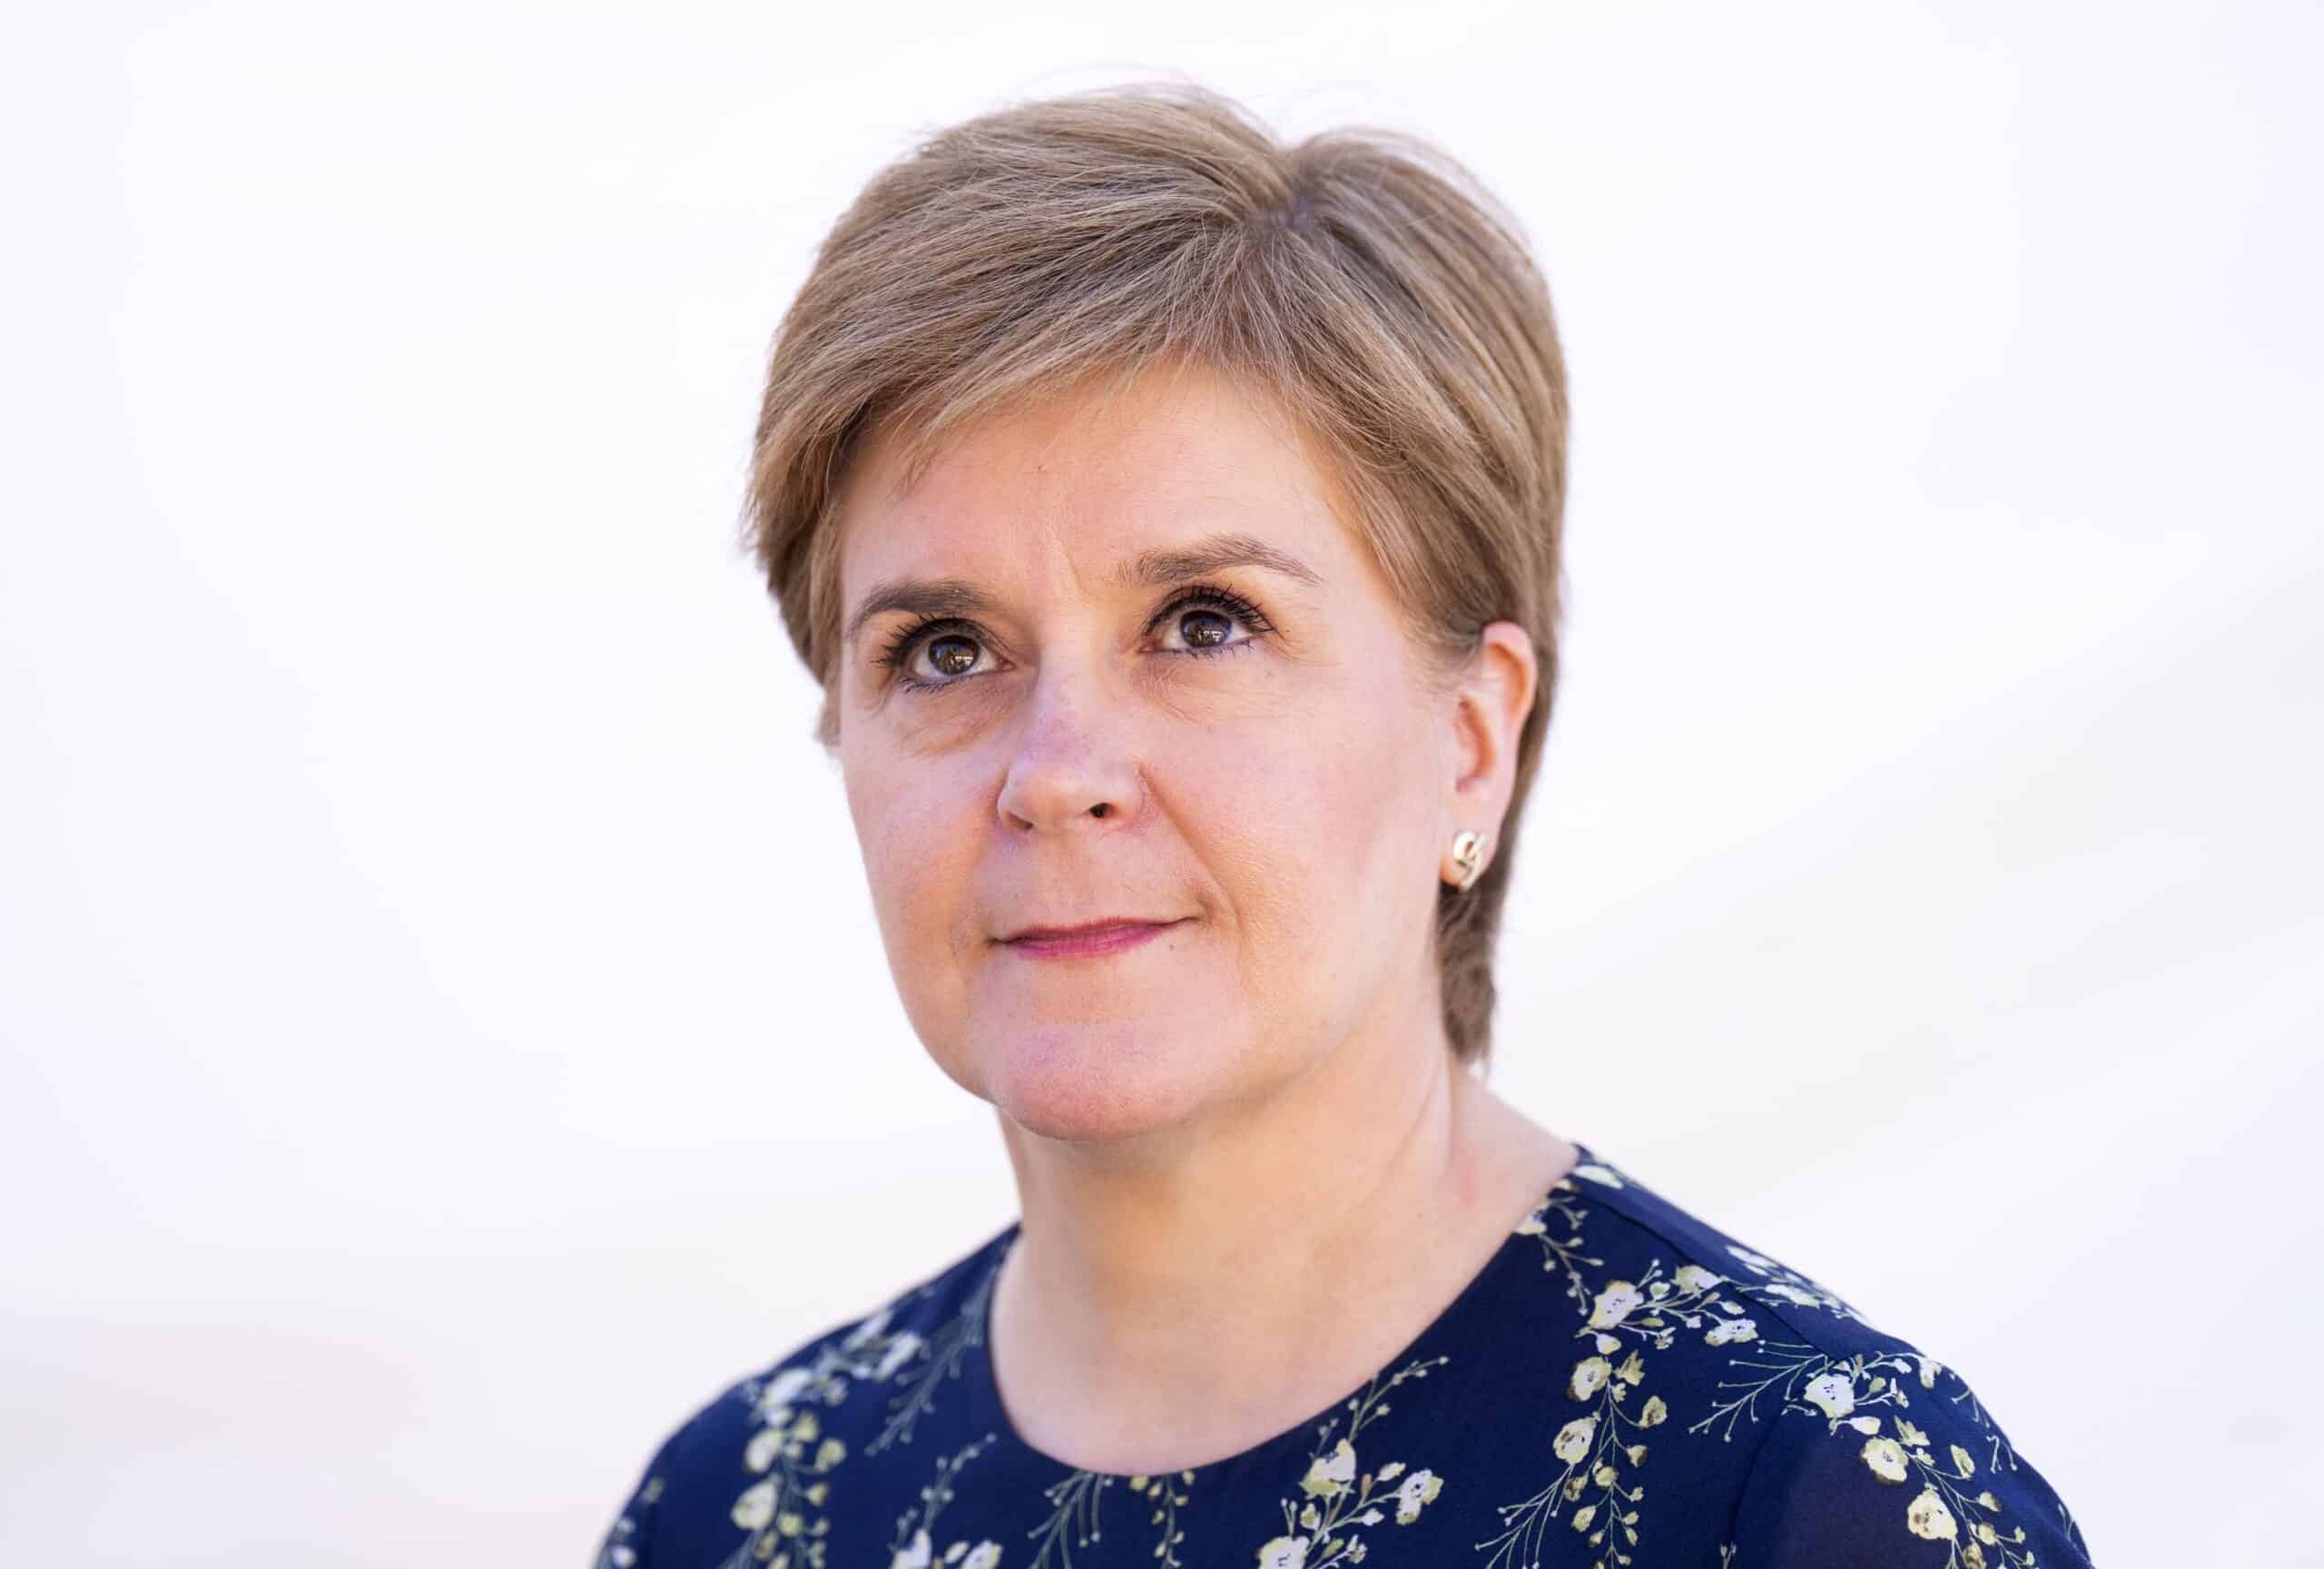 Nicola Sturgeon: I attended memorial service ‘while still having a miscarriage’